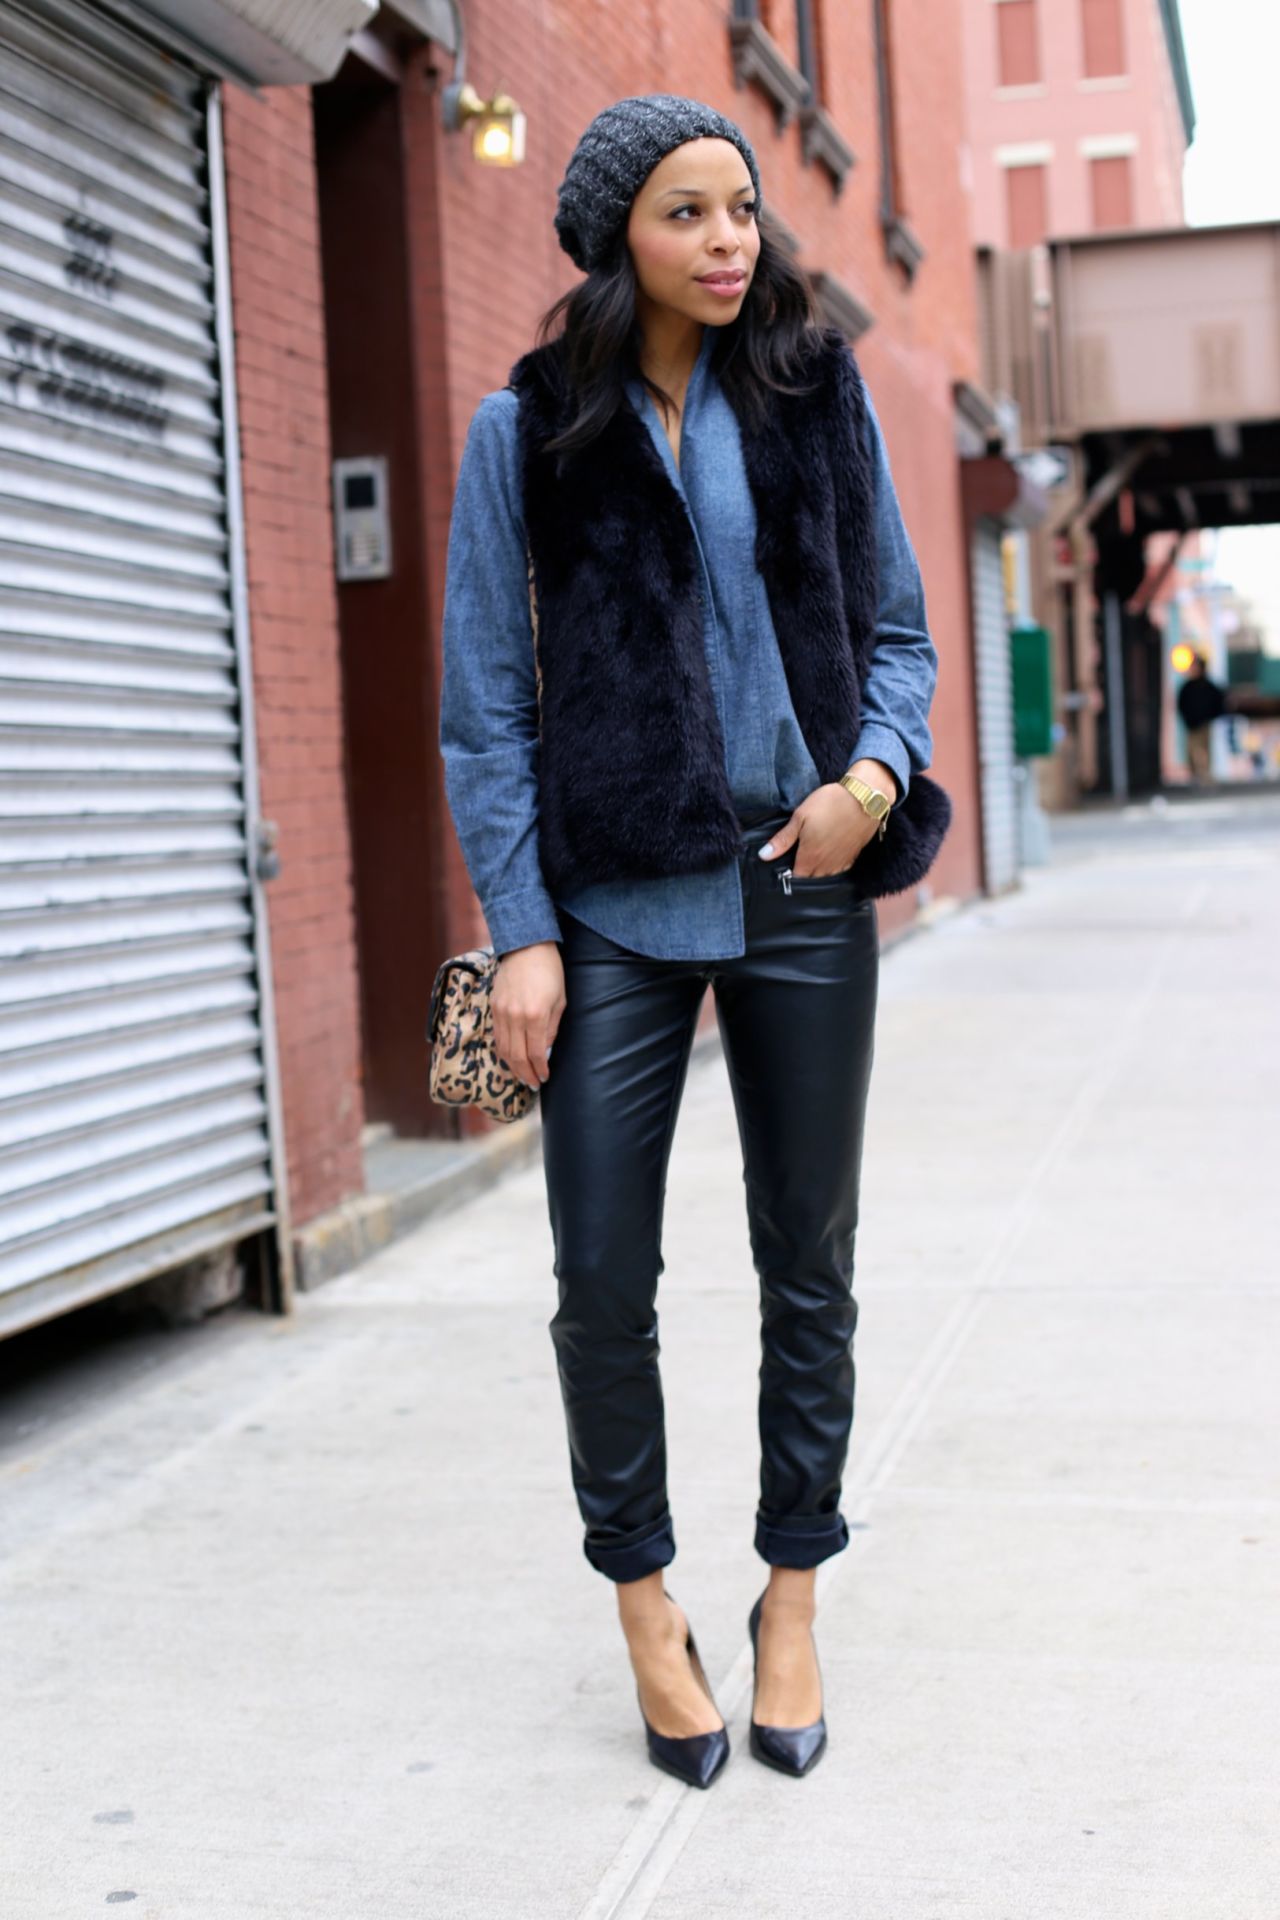 "Black leather skinnies, a dark denim button down and classic black pumps are staples in an urban woman's wardrobe," Lloyd says.